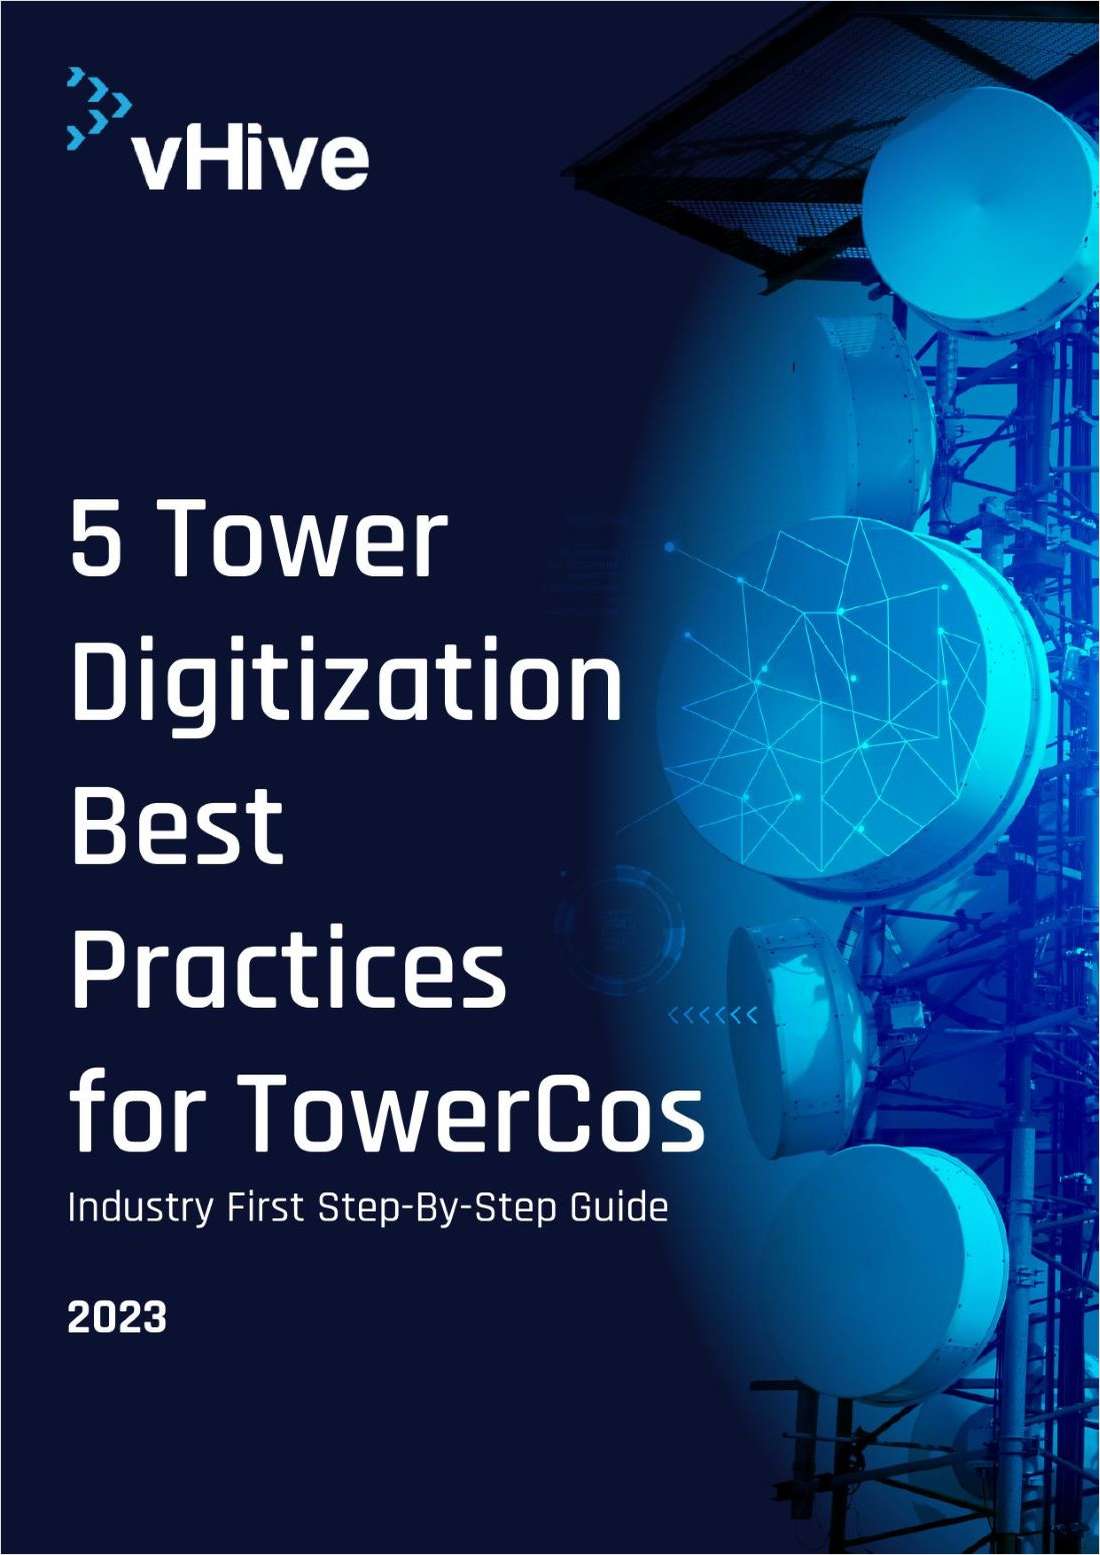 Tower Digitization Best Practices for TowerCos  Industry first step-by-step guide